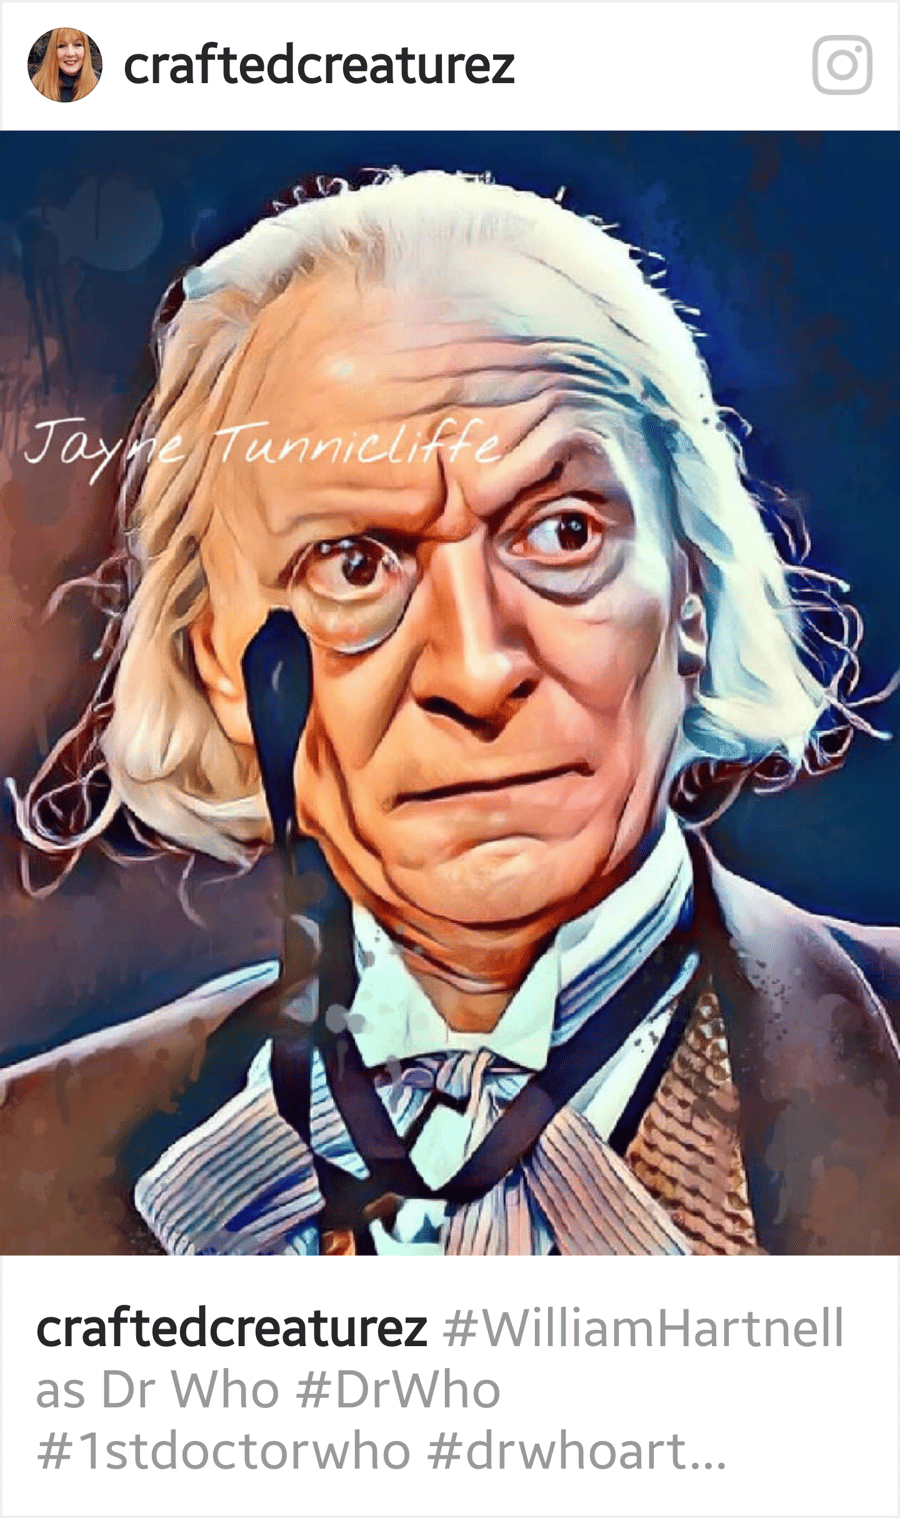 William Hartnell - 11 x 8 inches art print - The first Doctor Who